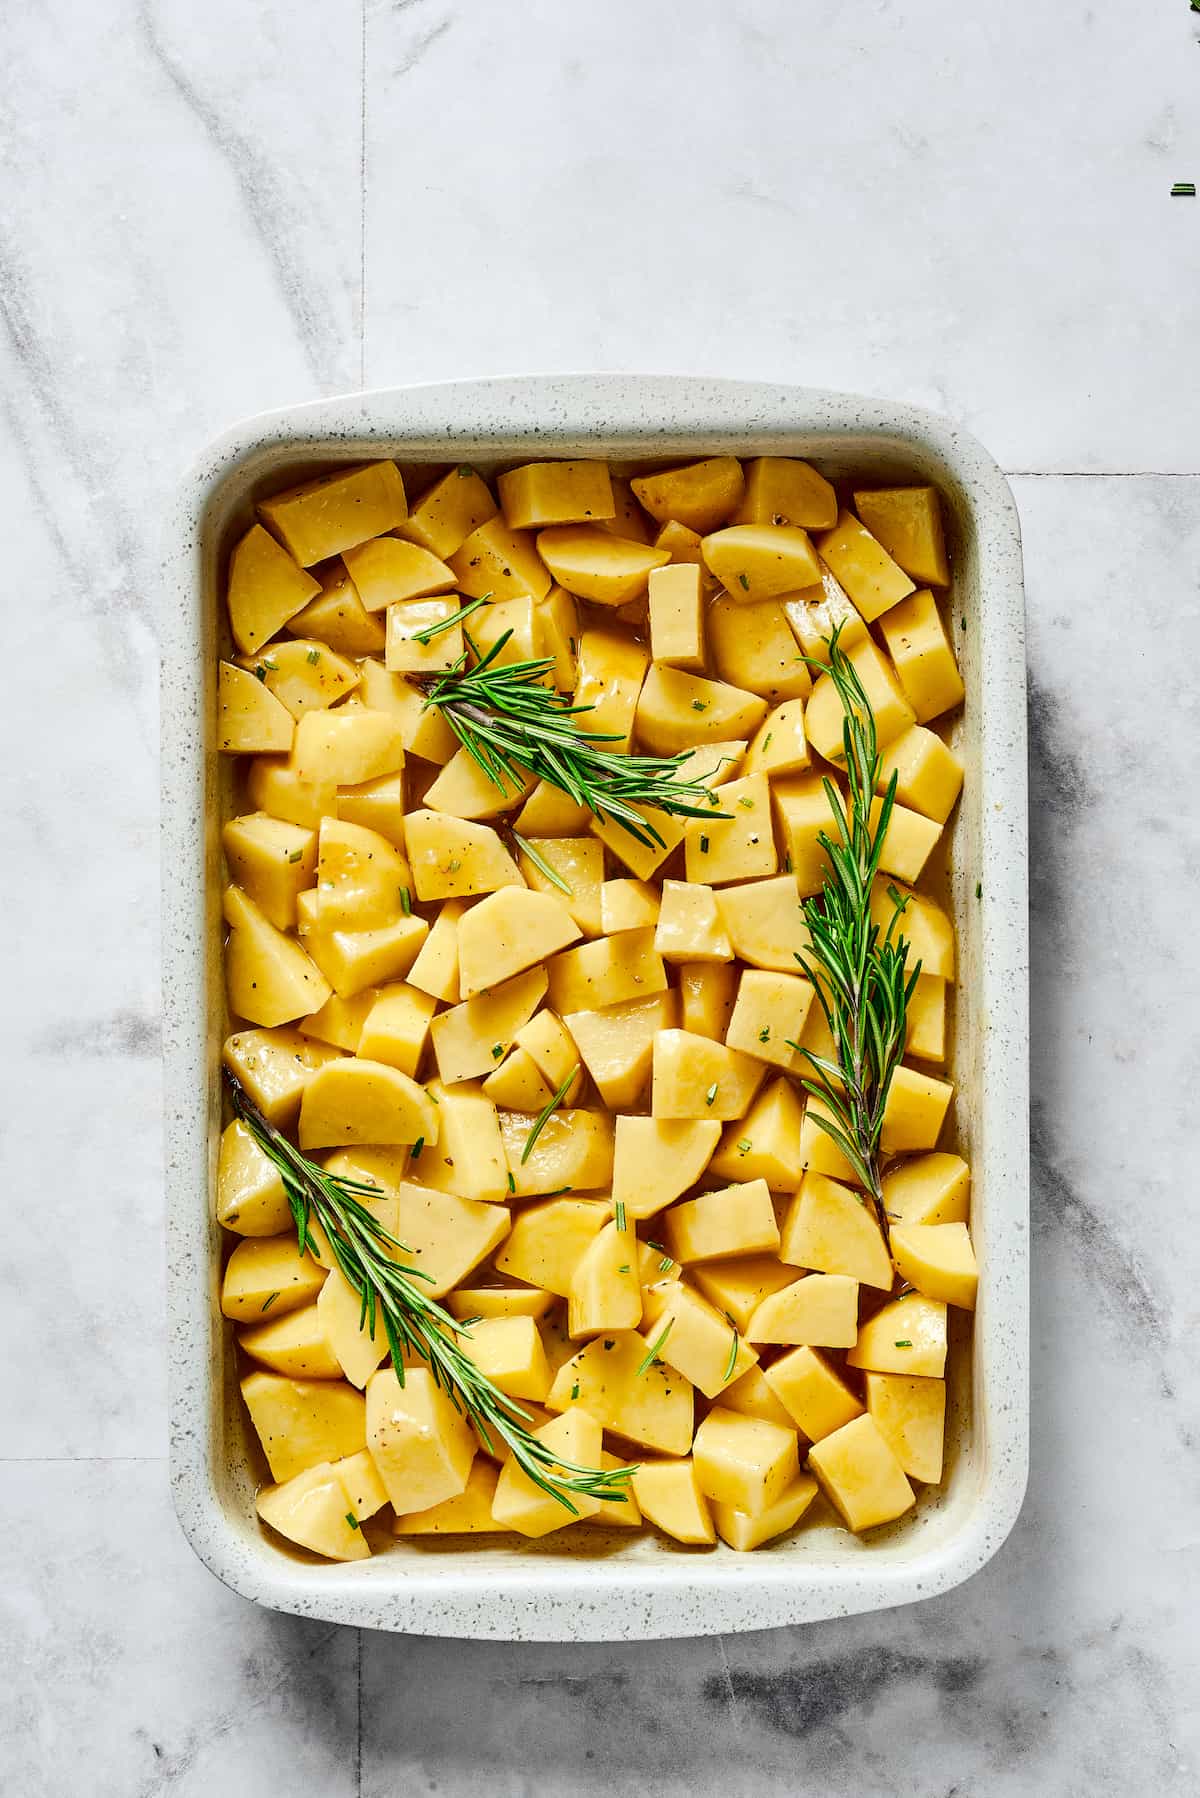 Seasoned raw potatoes and rosemary sprigs in a baking dish.